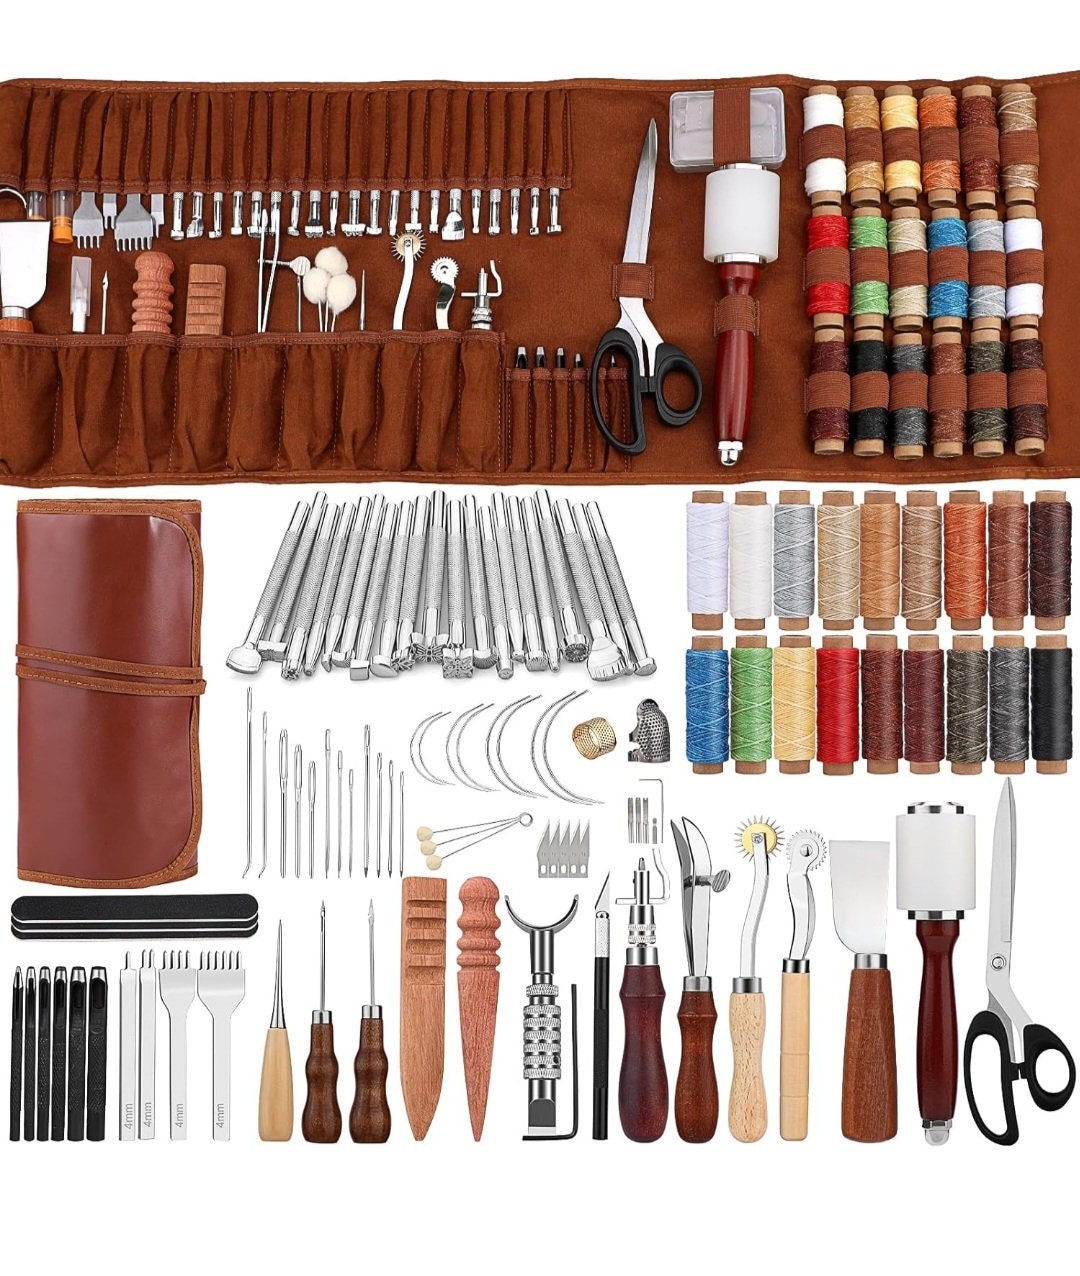 ArtSkills Leather Working Kit for Beginners with Leather Tools, Dyes, and  Leather Stamps, Leather Crafting Kits for Adults & Teens, 64 pc